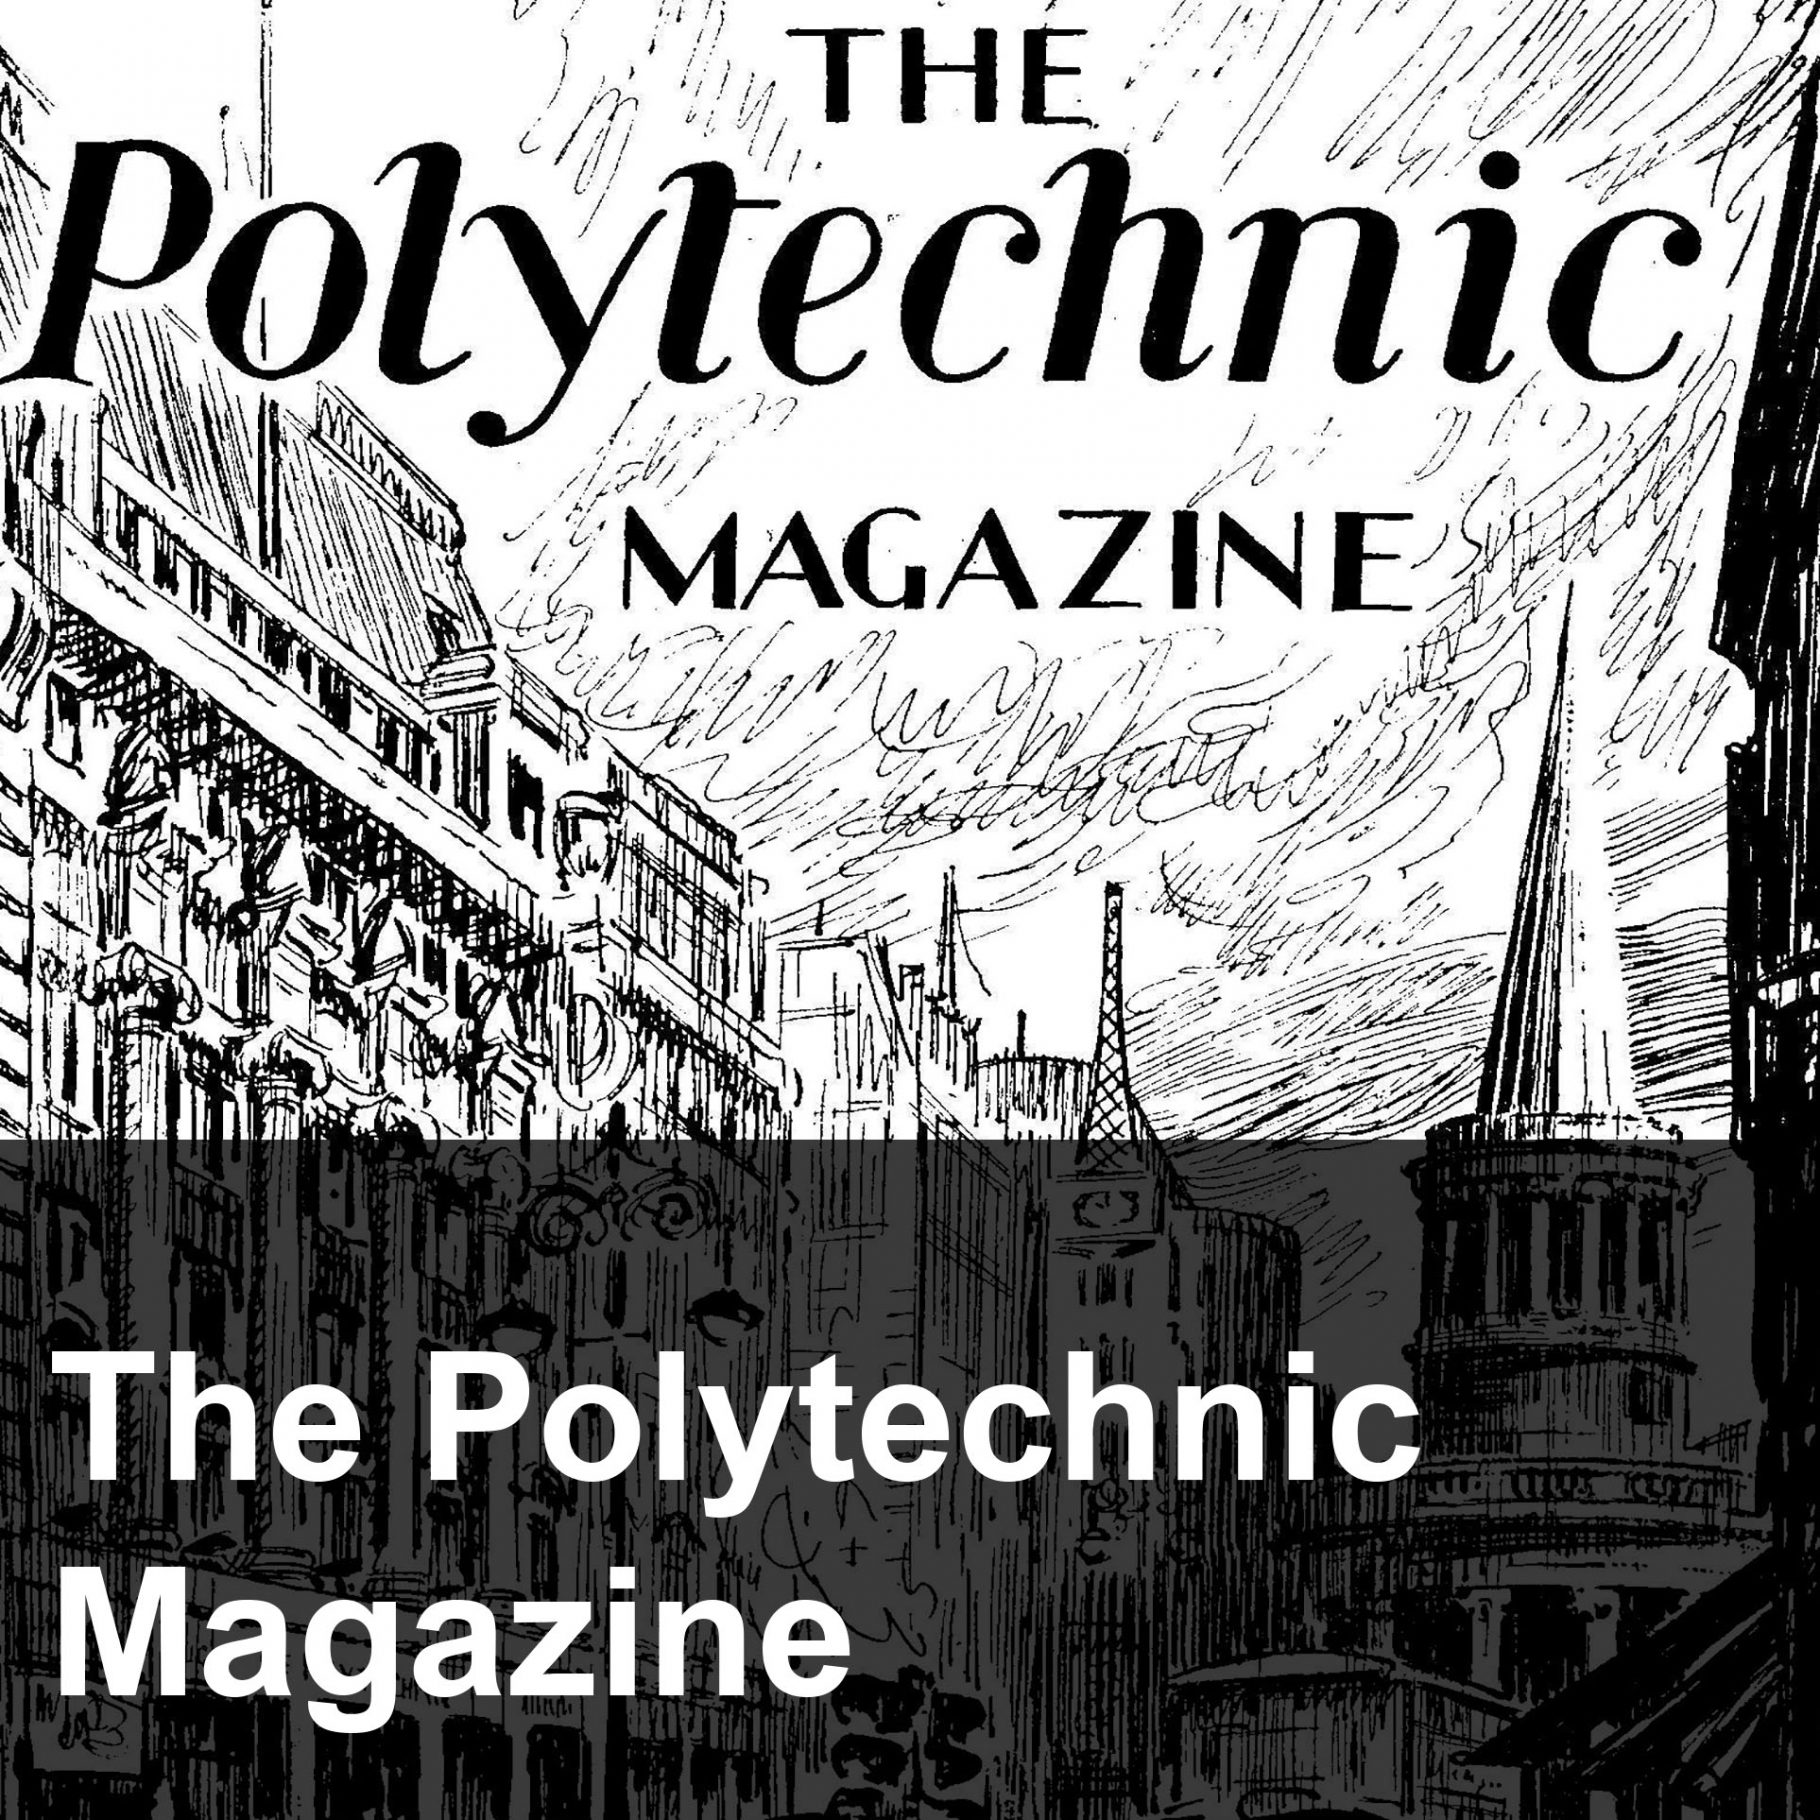 Link to The Polytechnic Magazine